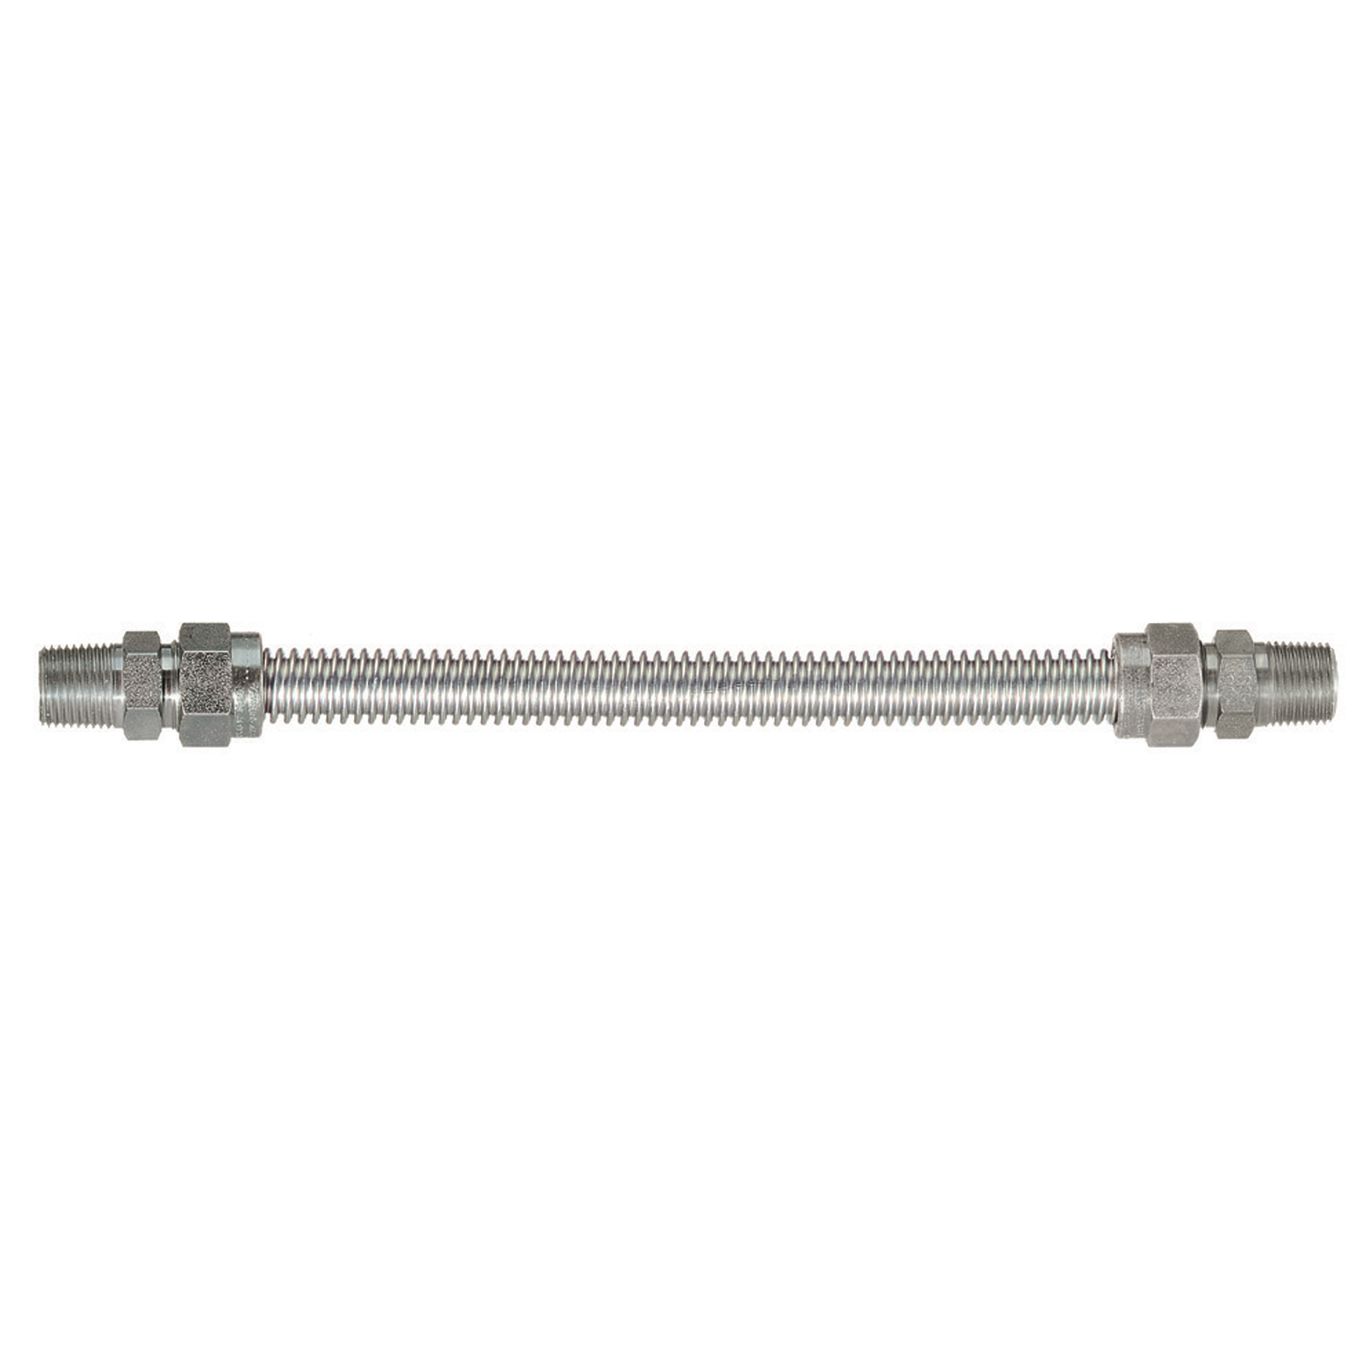 Gas Connector, 3/8 Inch Inner Dia., 1/2 Inch x 1/2 Inch Size, 18 Inch Length